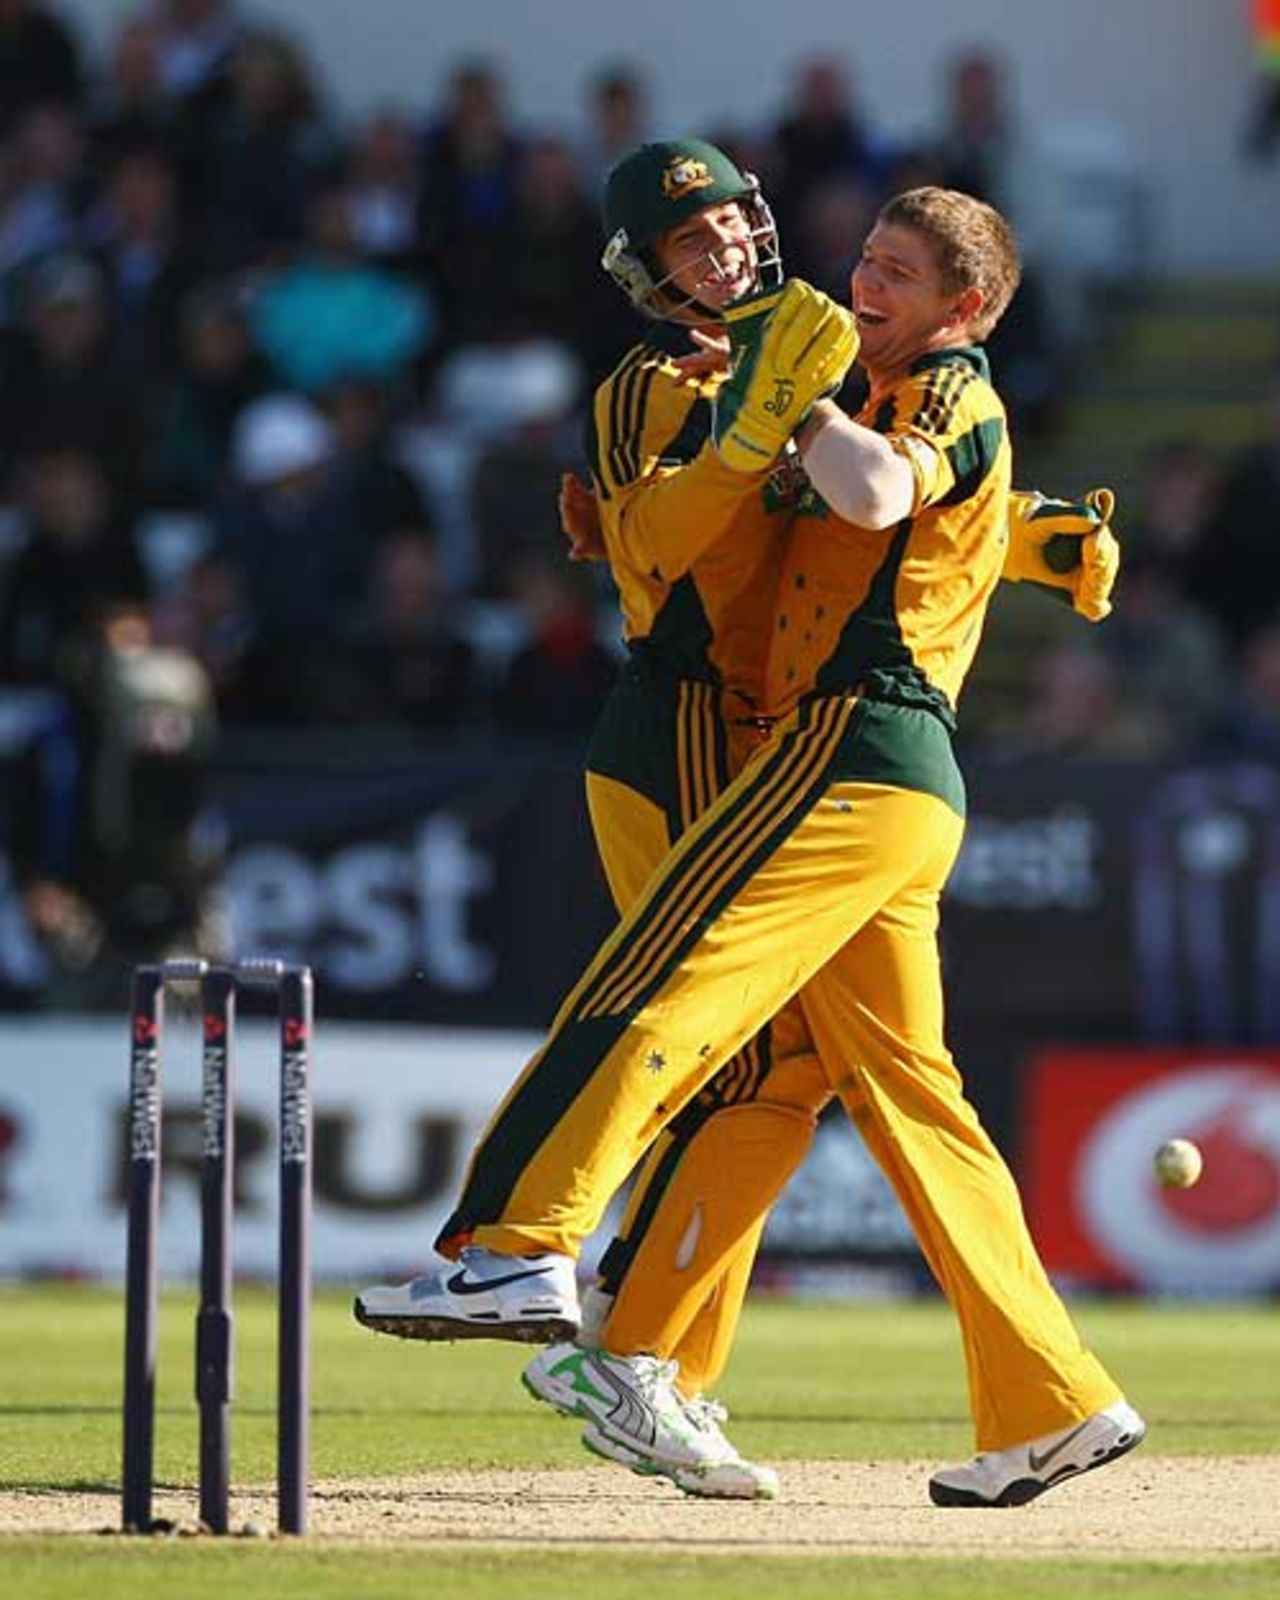 James Hopes and Tim Paine celebrated the wicket of Owais Shah, England v Australia, 7th ODI, Chester-le-Street, September 20, 2009